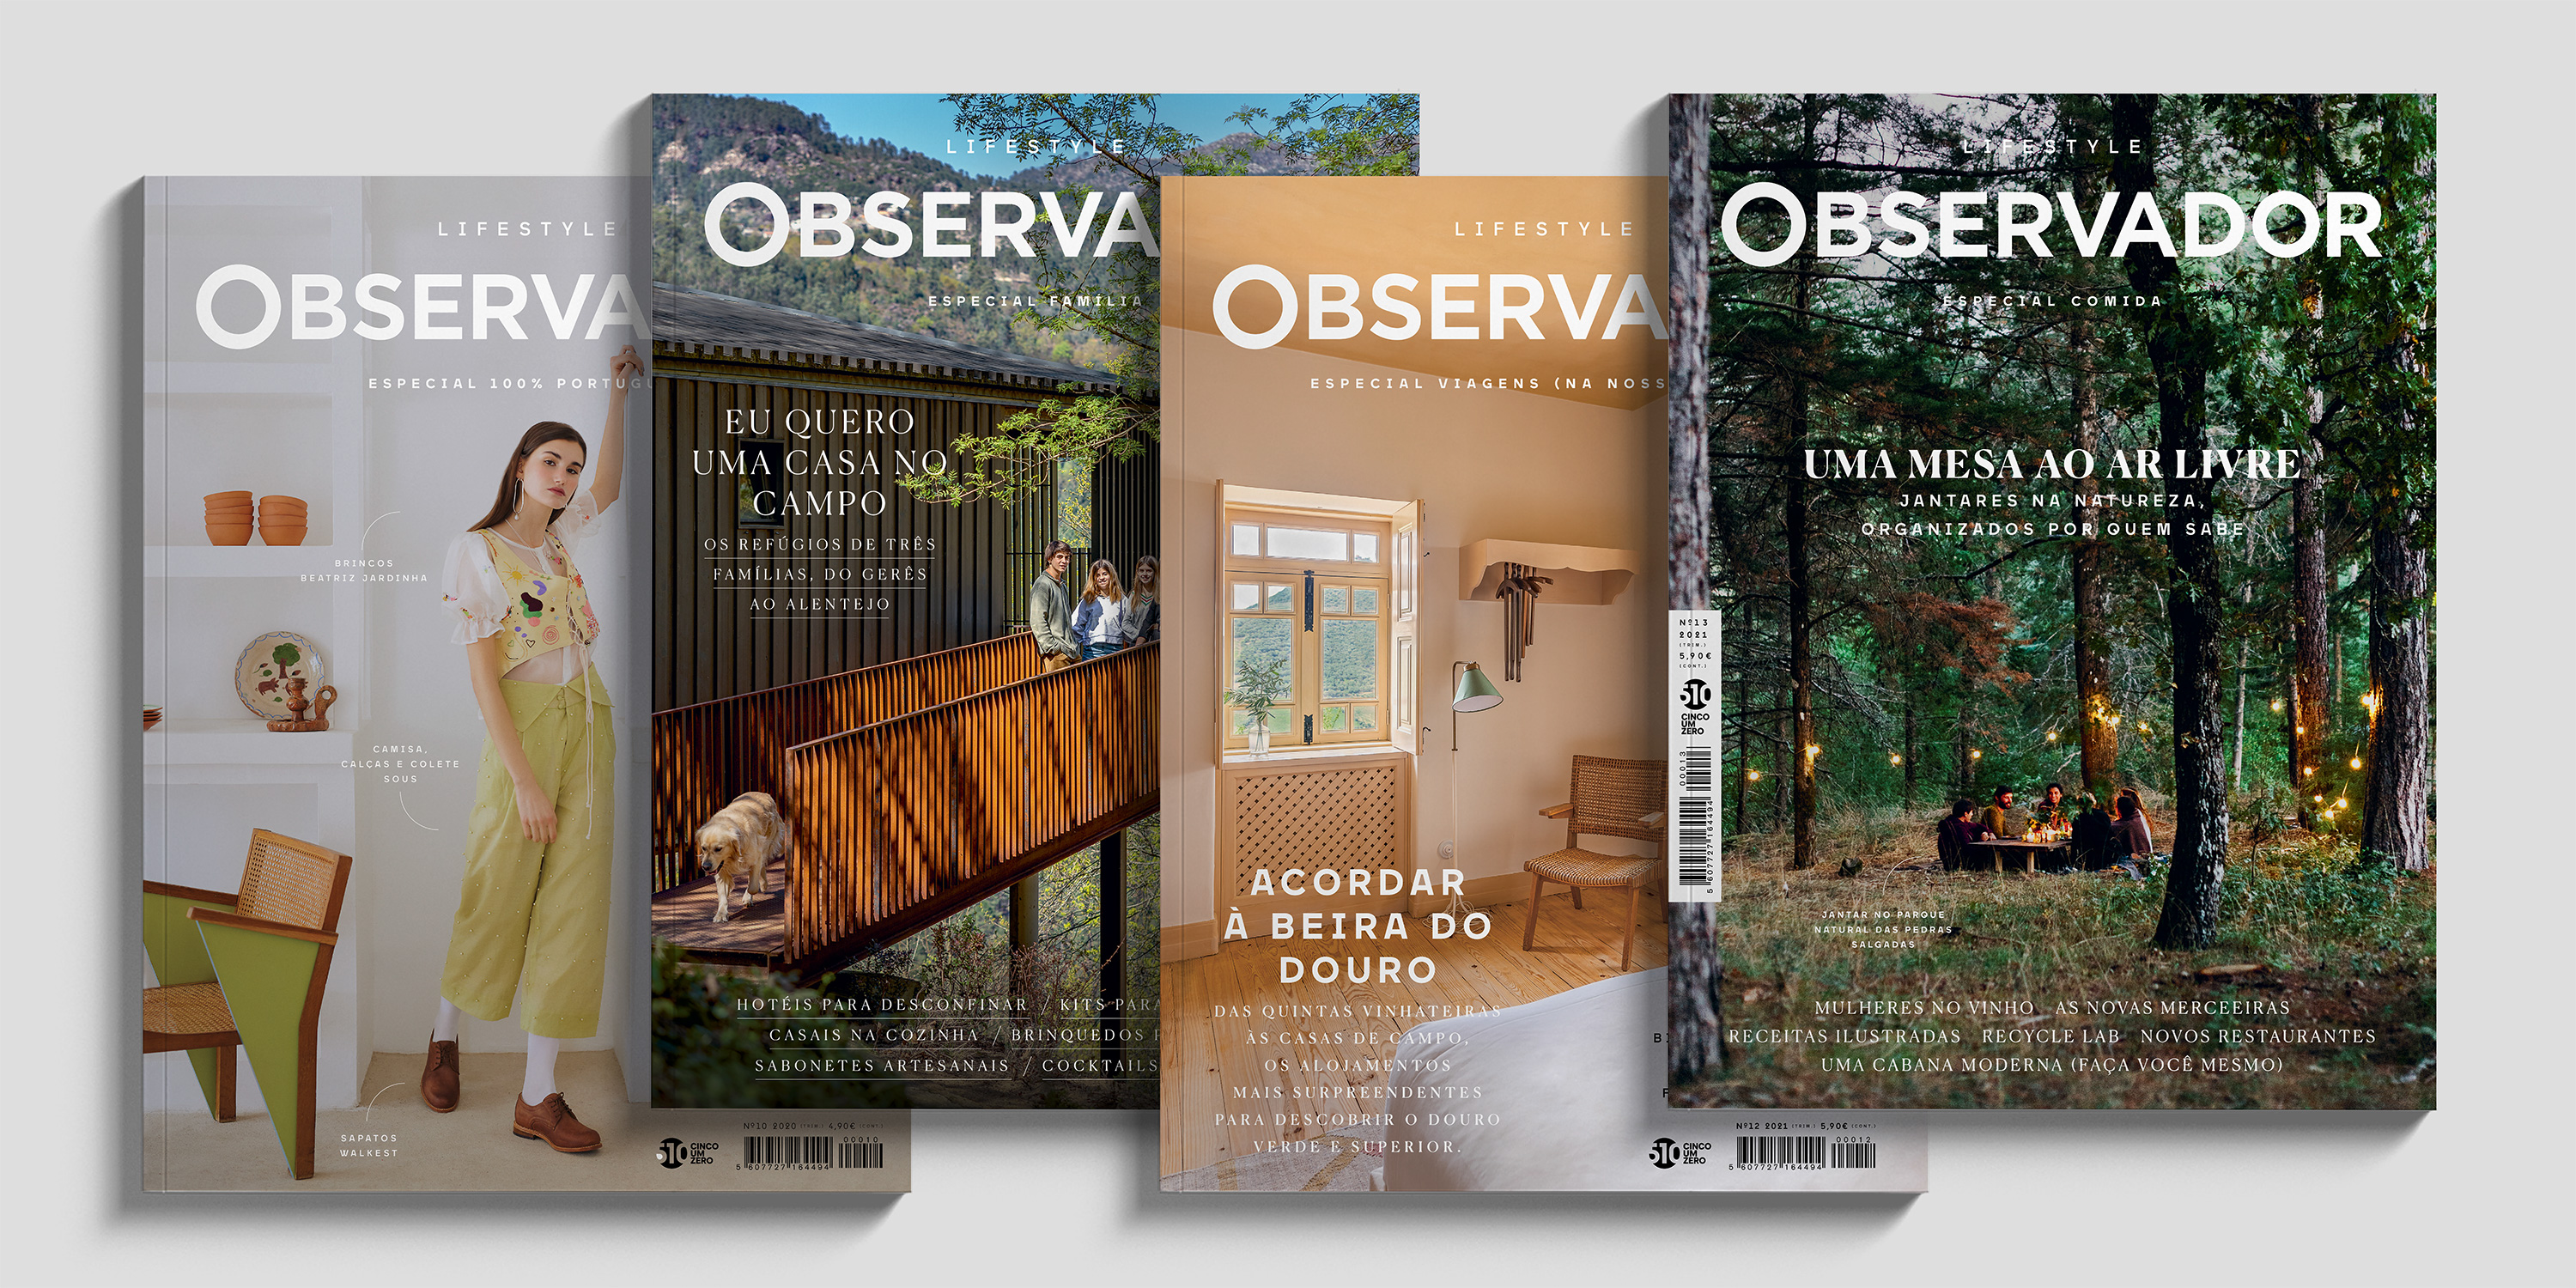 Subscription 1 year Observador Lifestyle